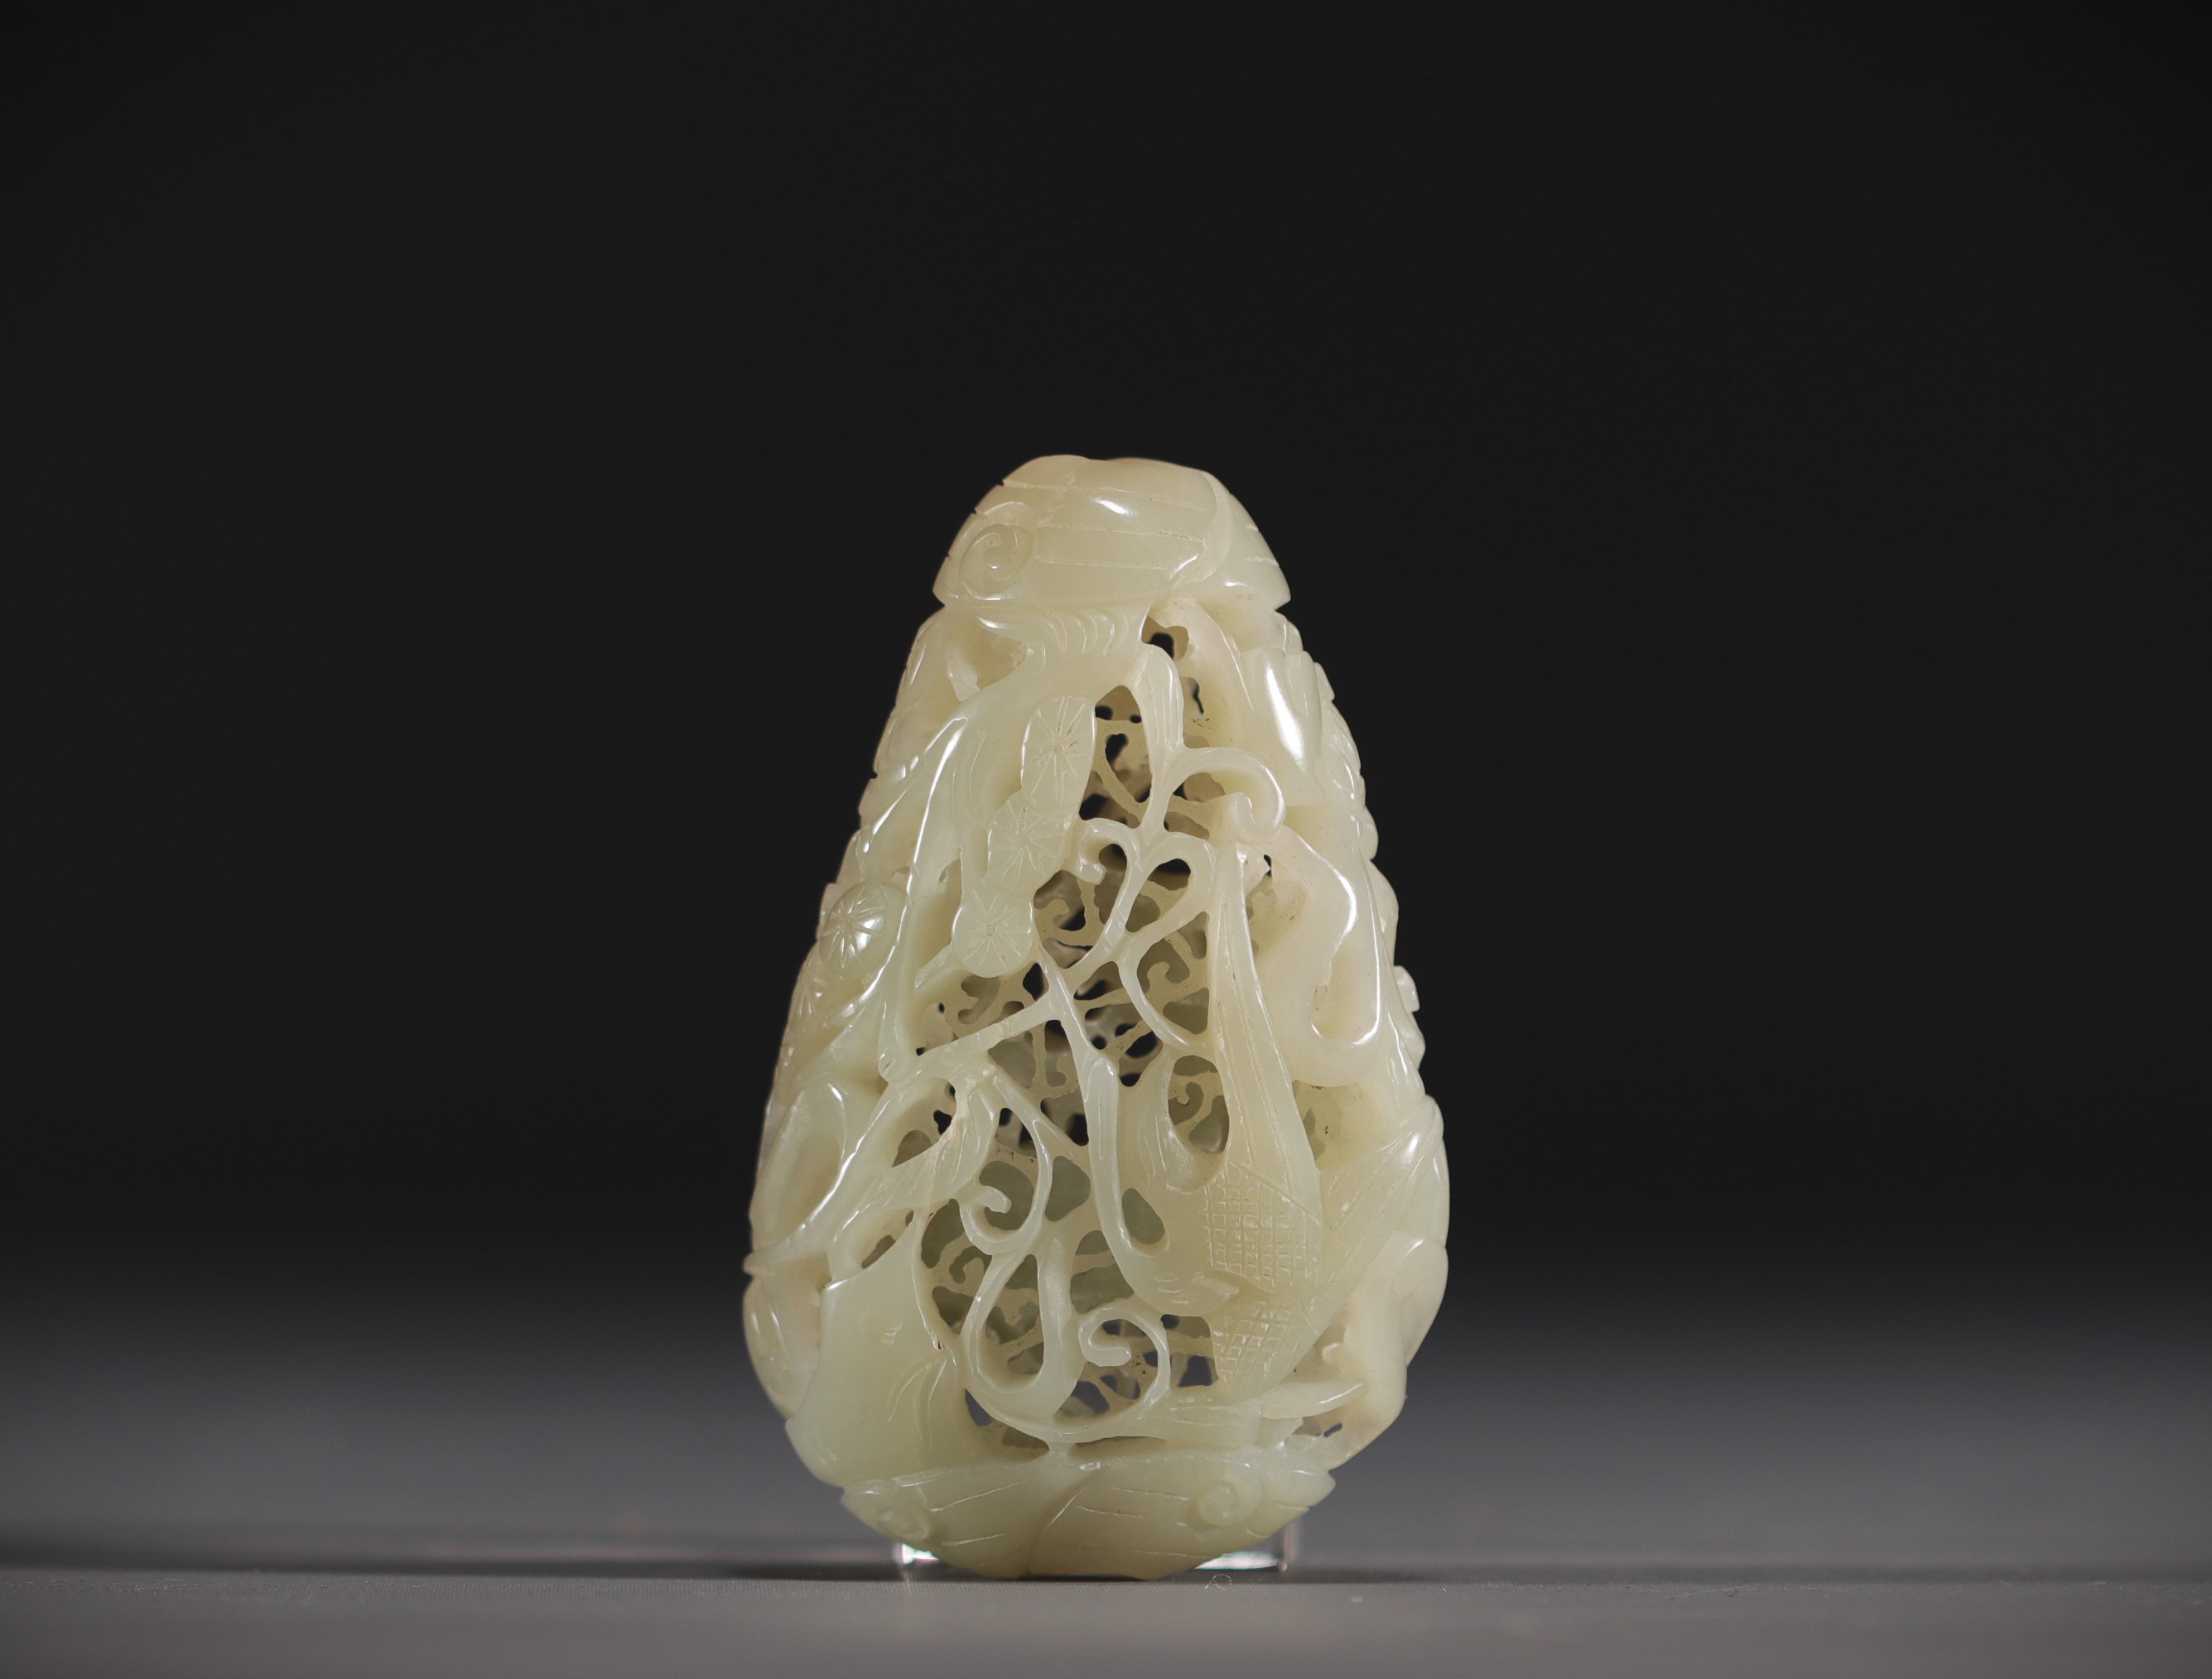 China - Carved and openworked white jade pendant with animal decoration, 18th century. - Image 2 of 3